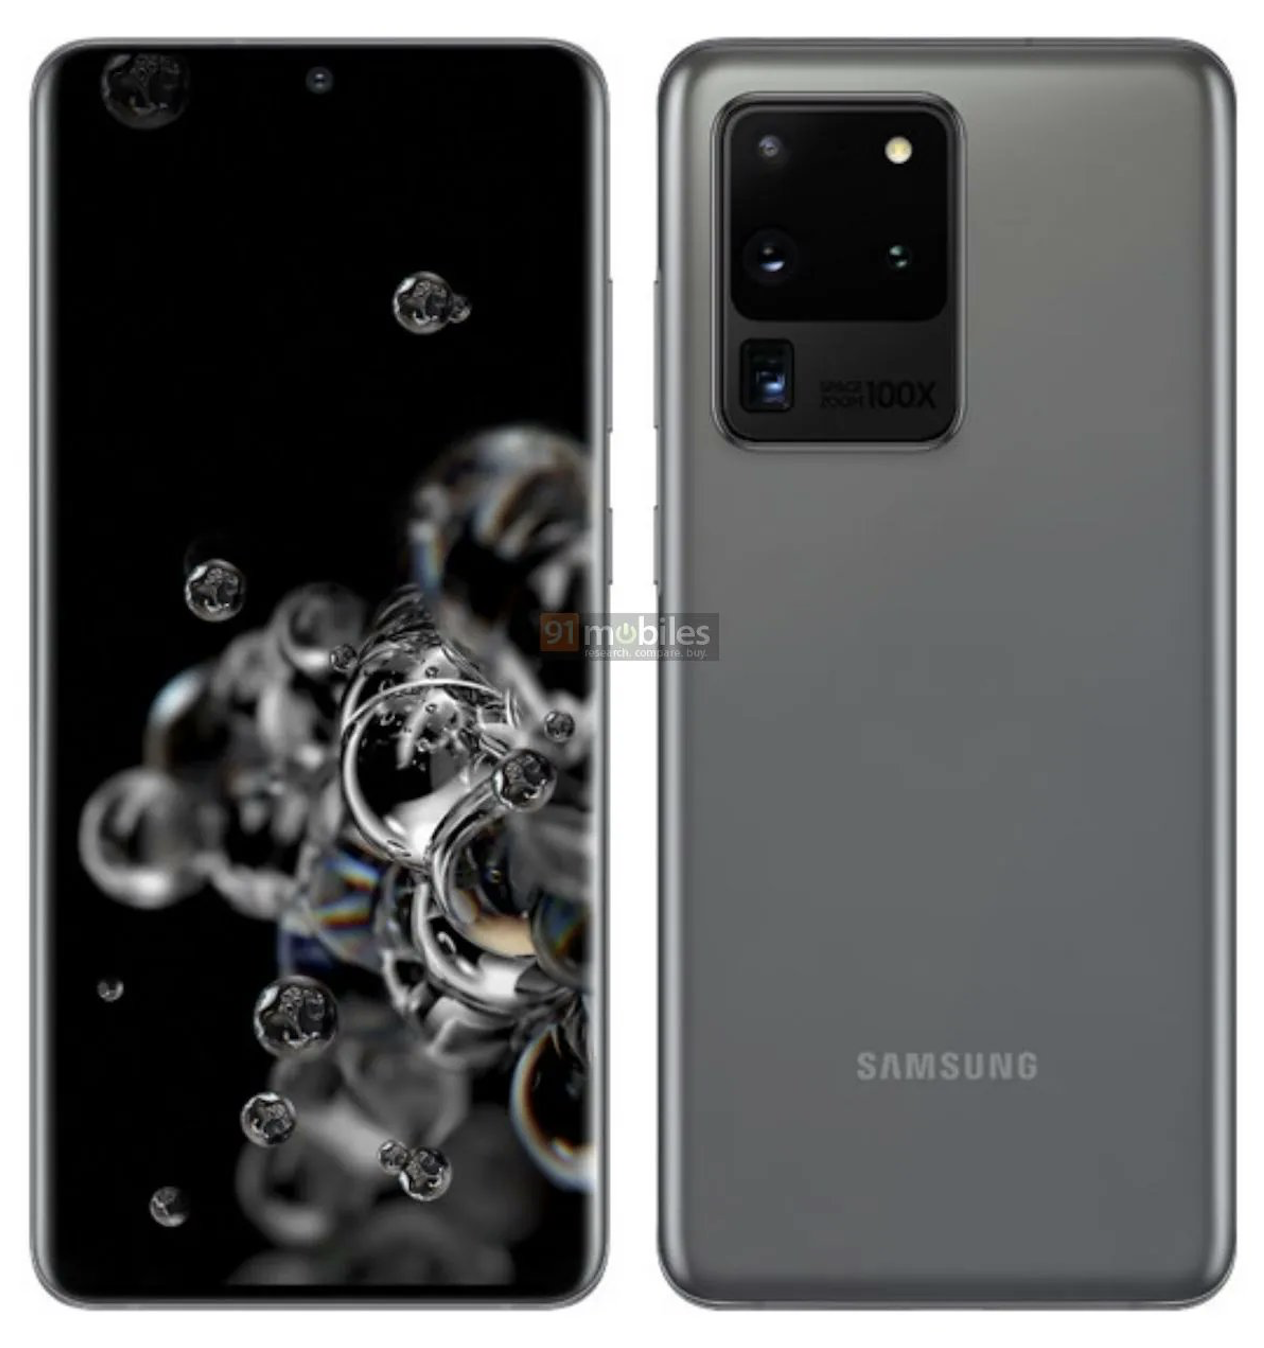 What kind of cameras will the Samsung Galaxy S20 have?